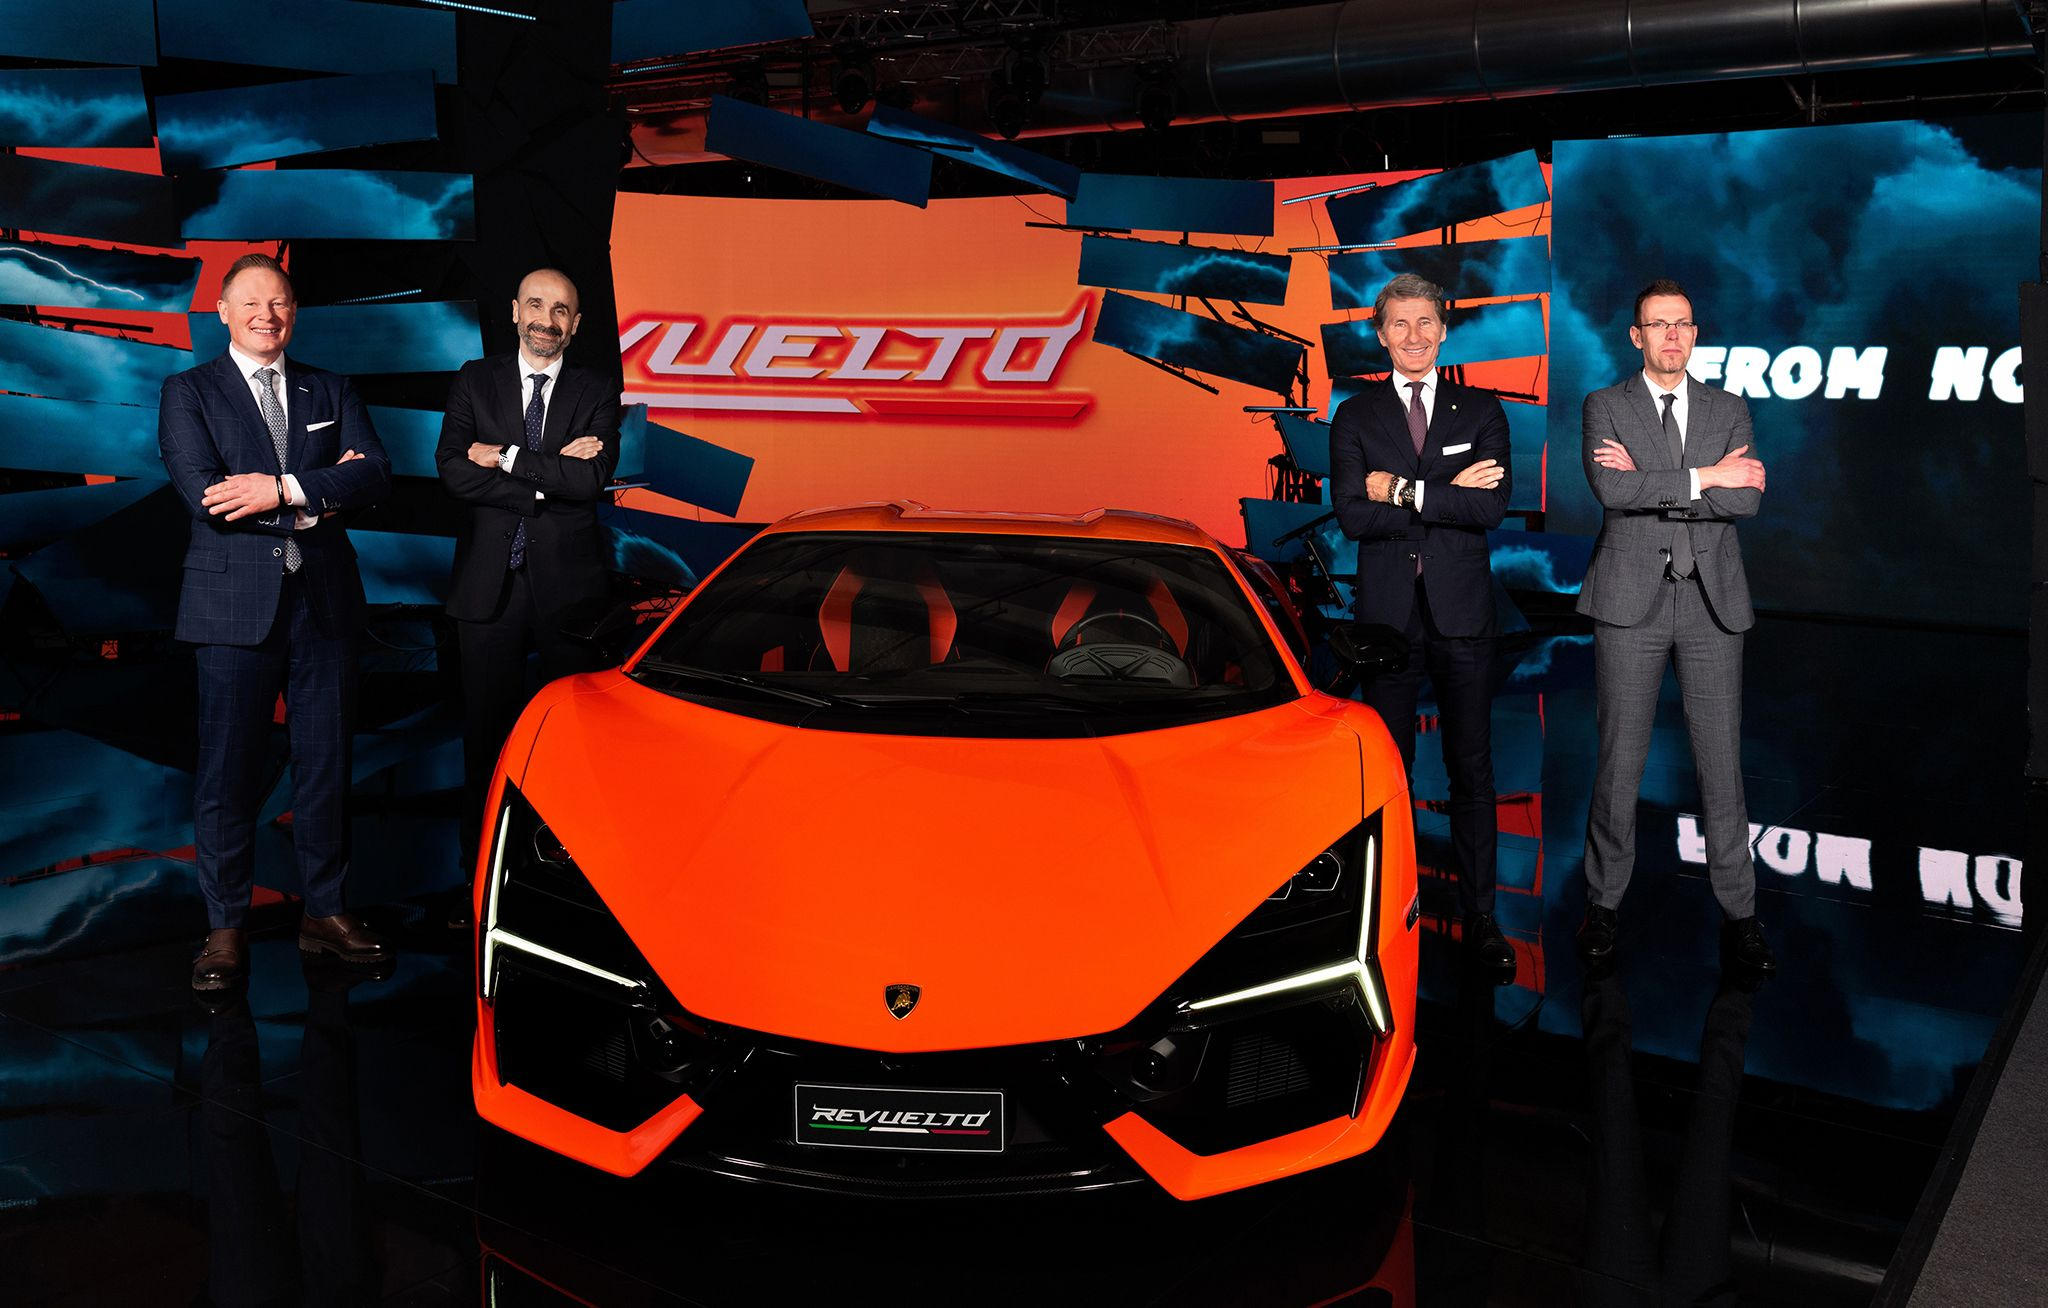 Lamborghini - The first super sports V12 hybrid HPEV, unveiled to media, owners and celebrities  - cChic Magazine Suisse